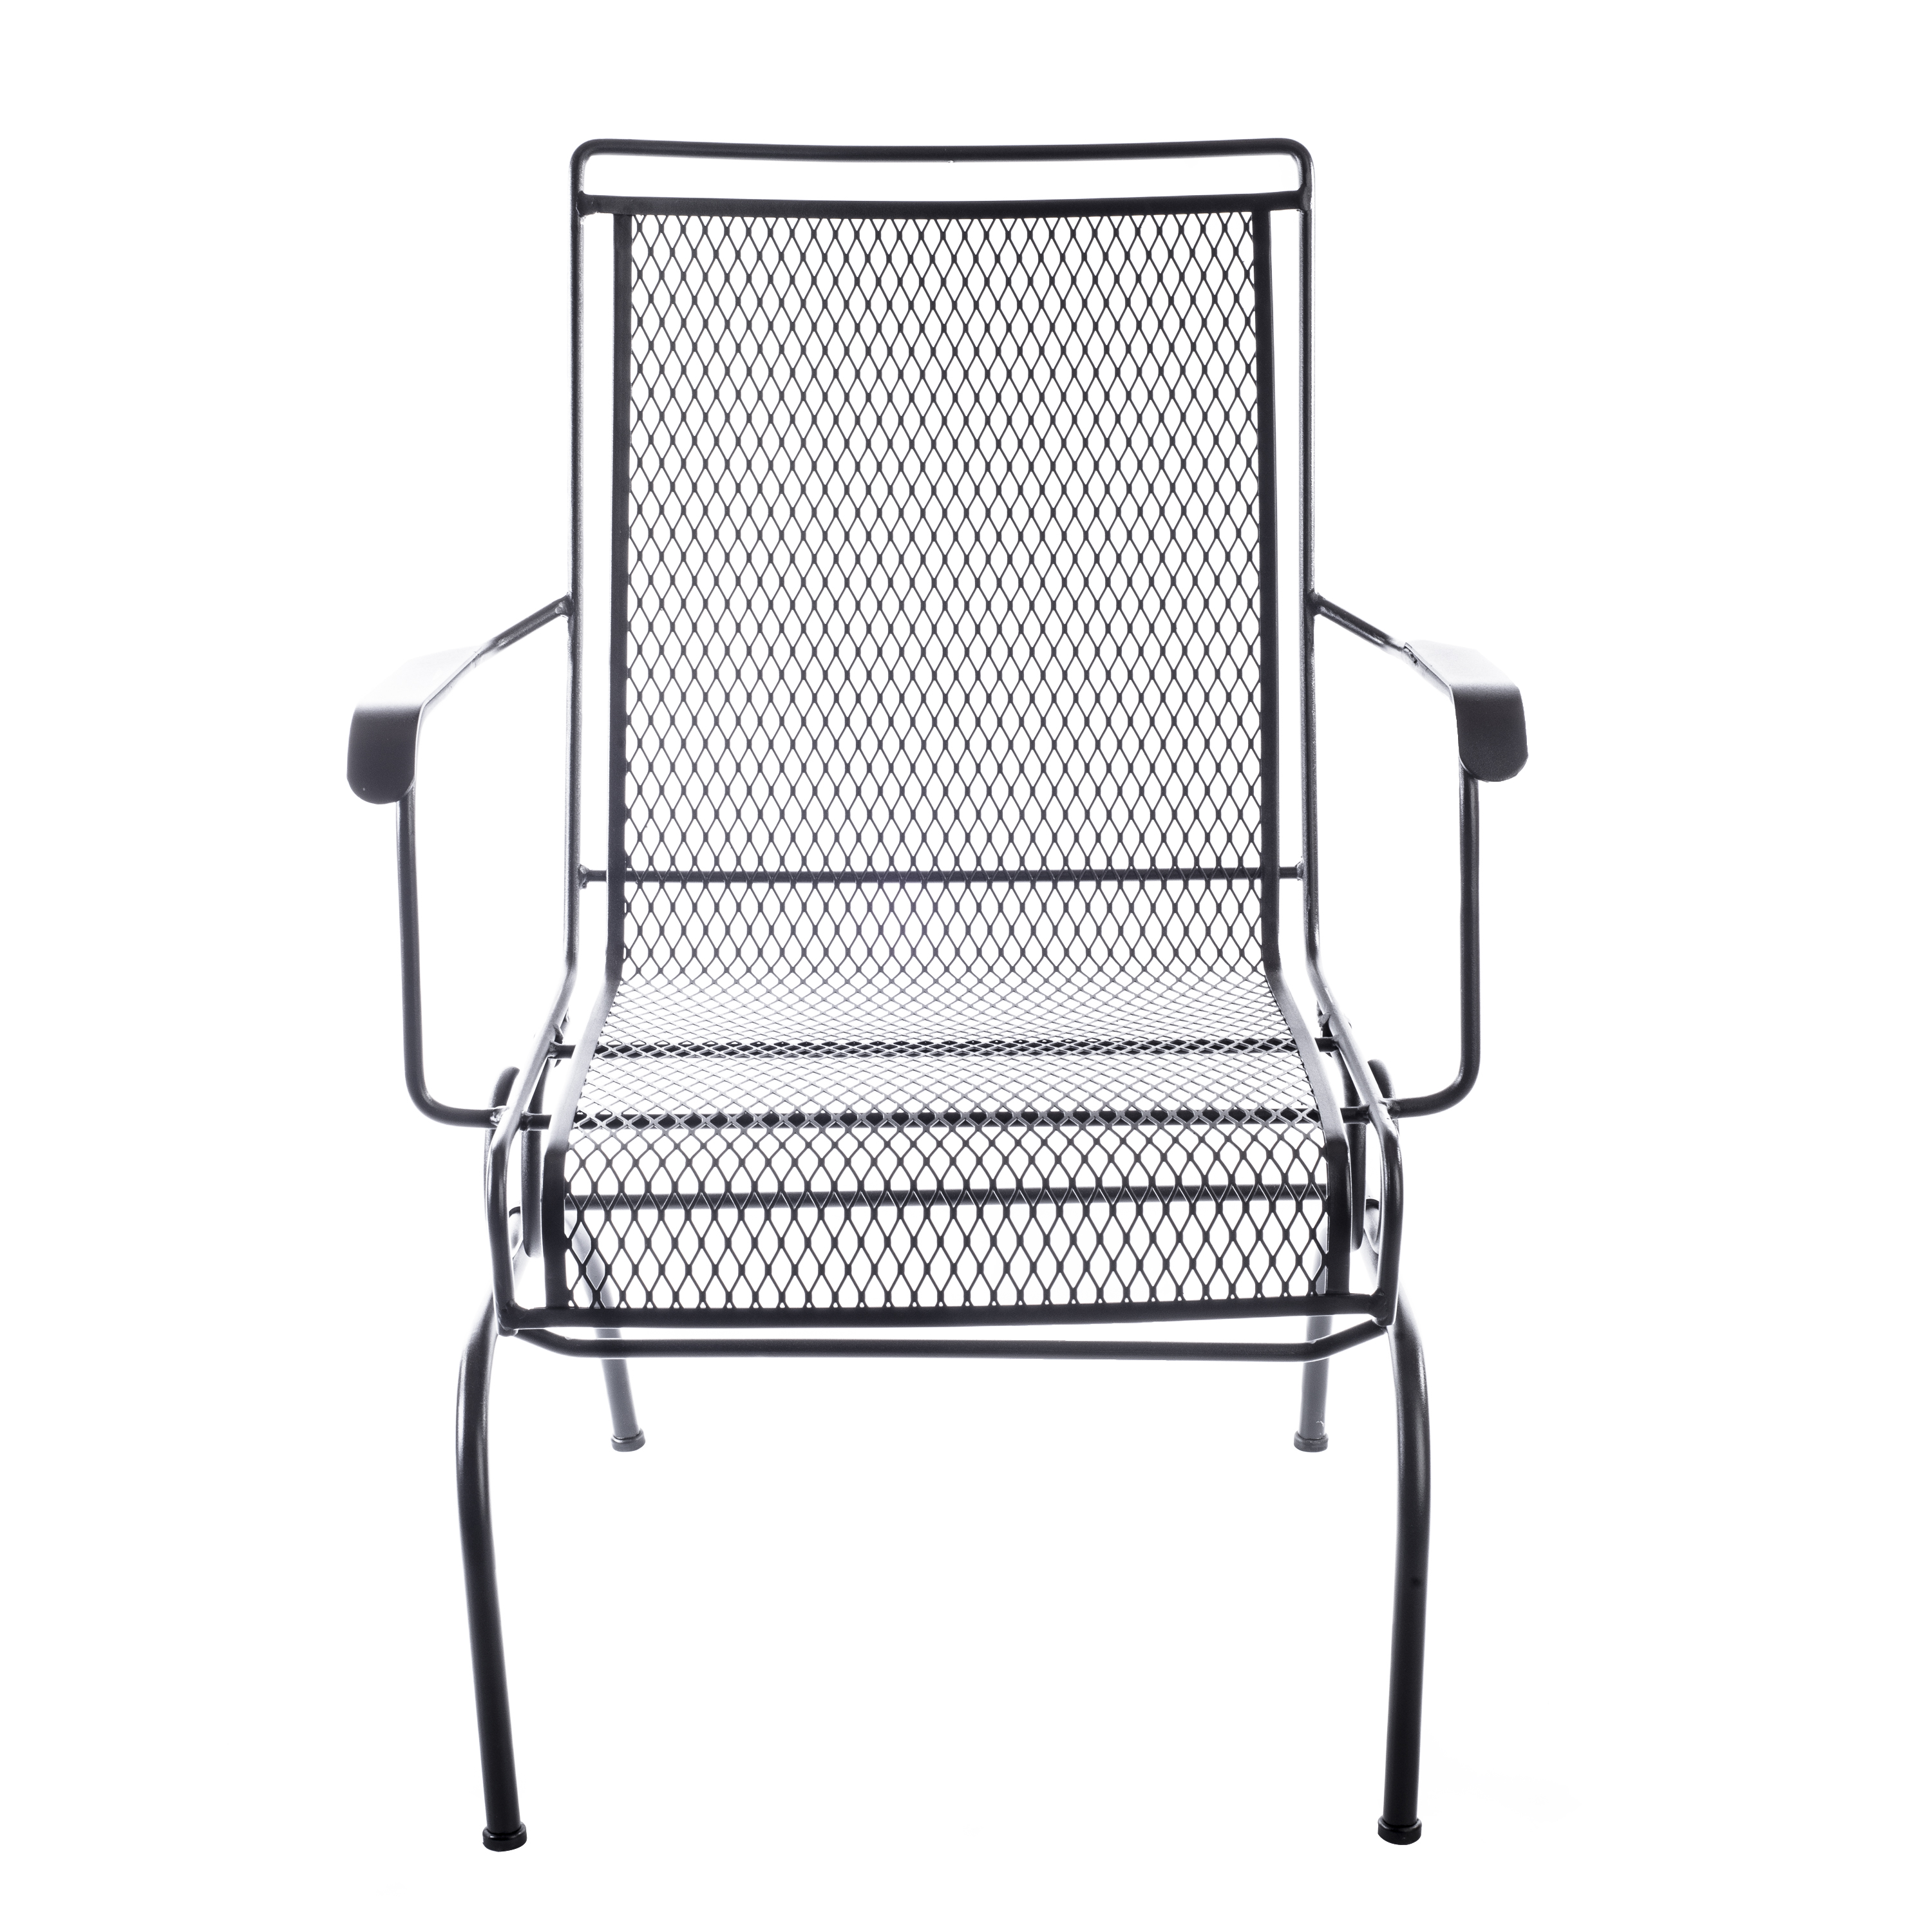 Arlington House Wrought Iron Outdoor Action Dining Chair, Charcoal - image 1 of 5